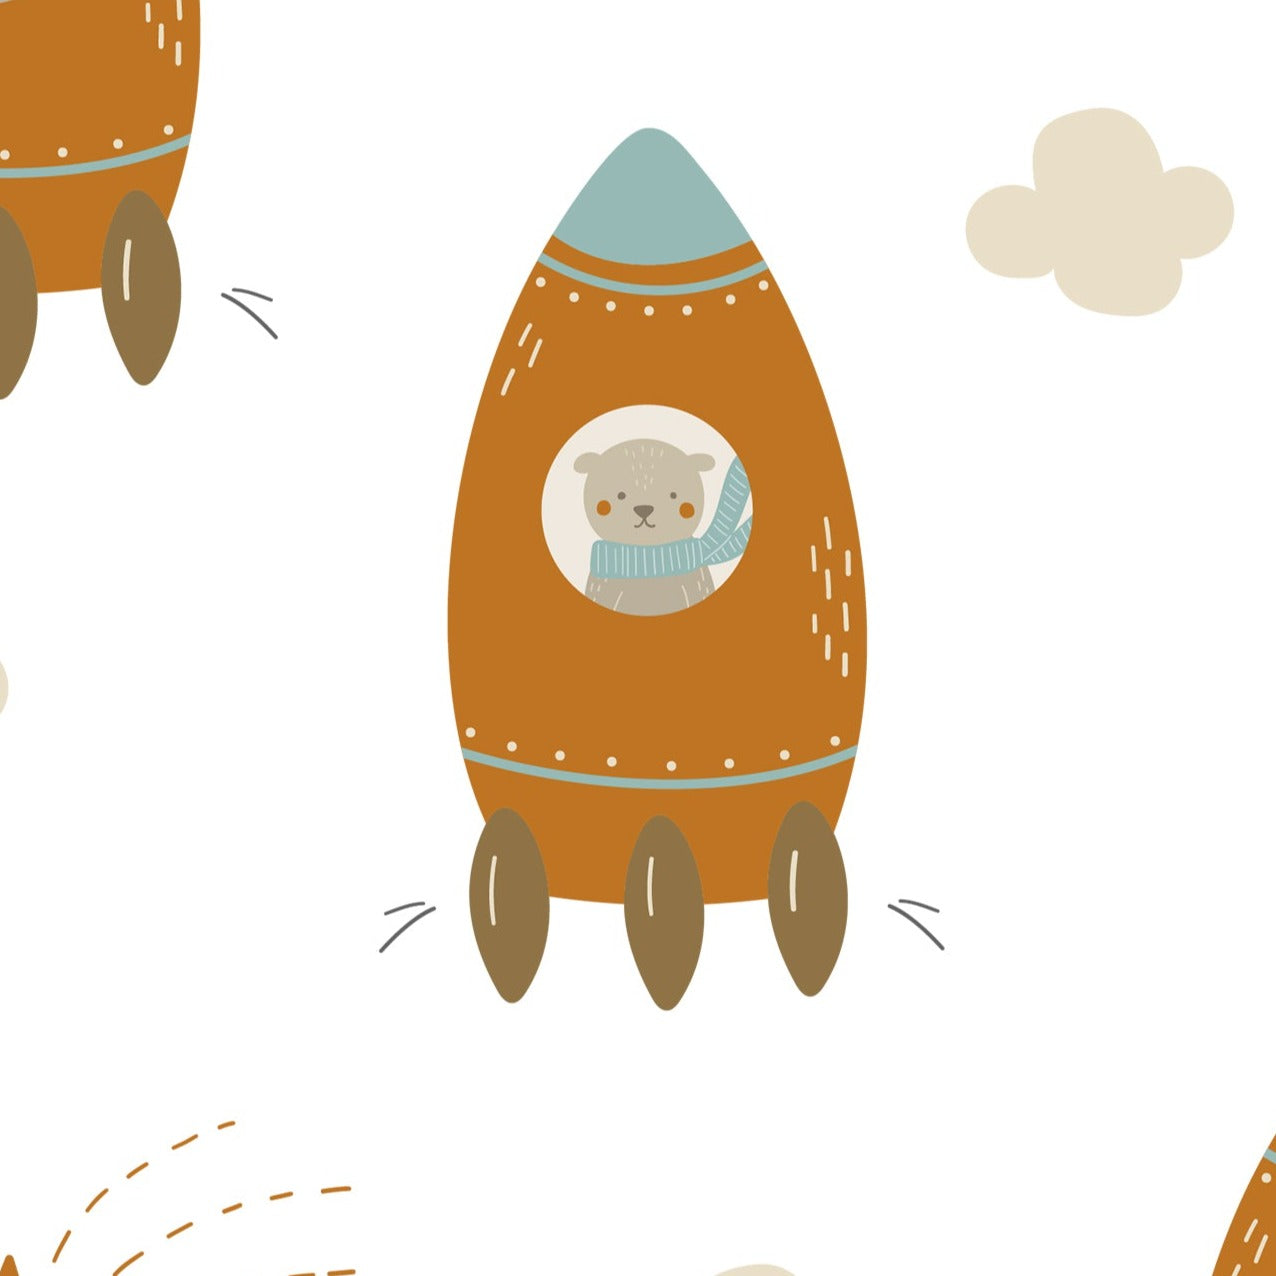 Detailed close-up of the Rocket Time Wallpaper featuring an adorable teddy bear astronaut inside an orange rocket, with a soft blue nose cone and small details like rivets and stripes, set against a white backdrop with clouds and star motifs